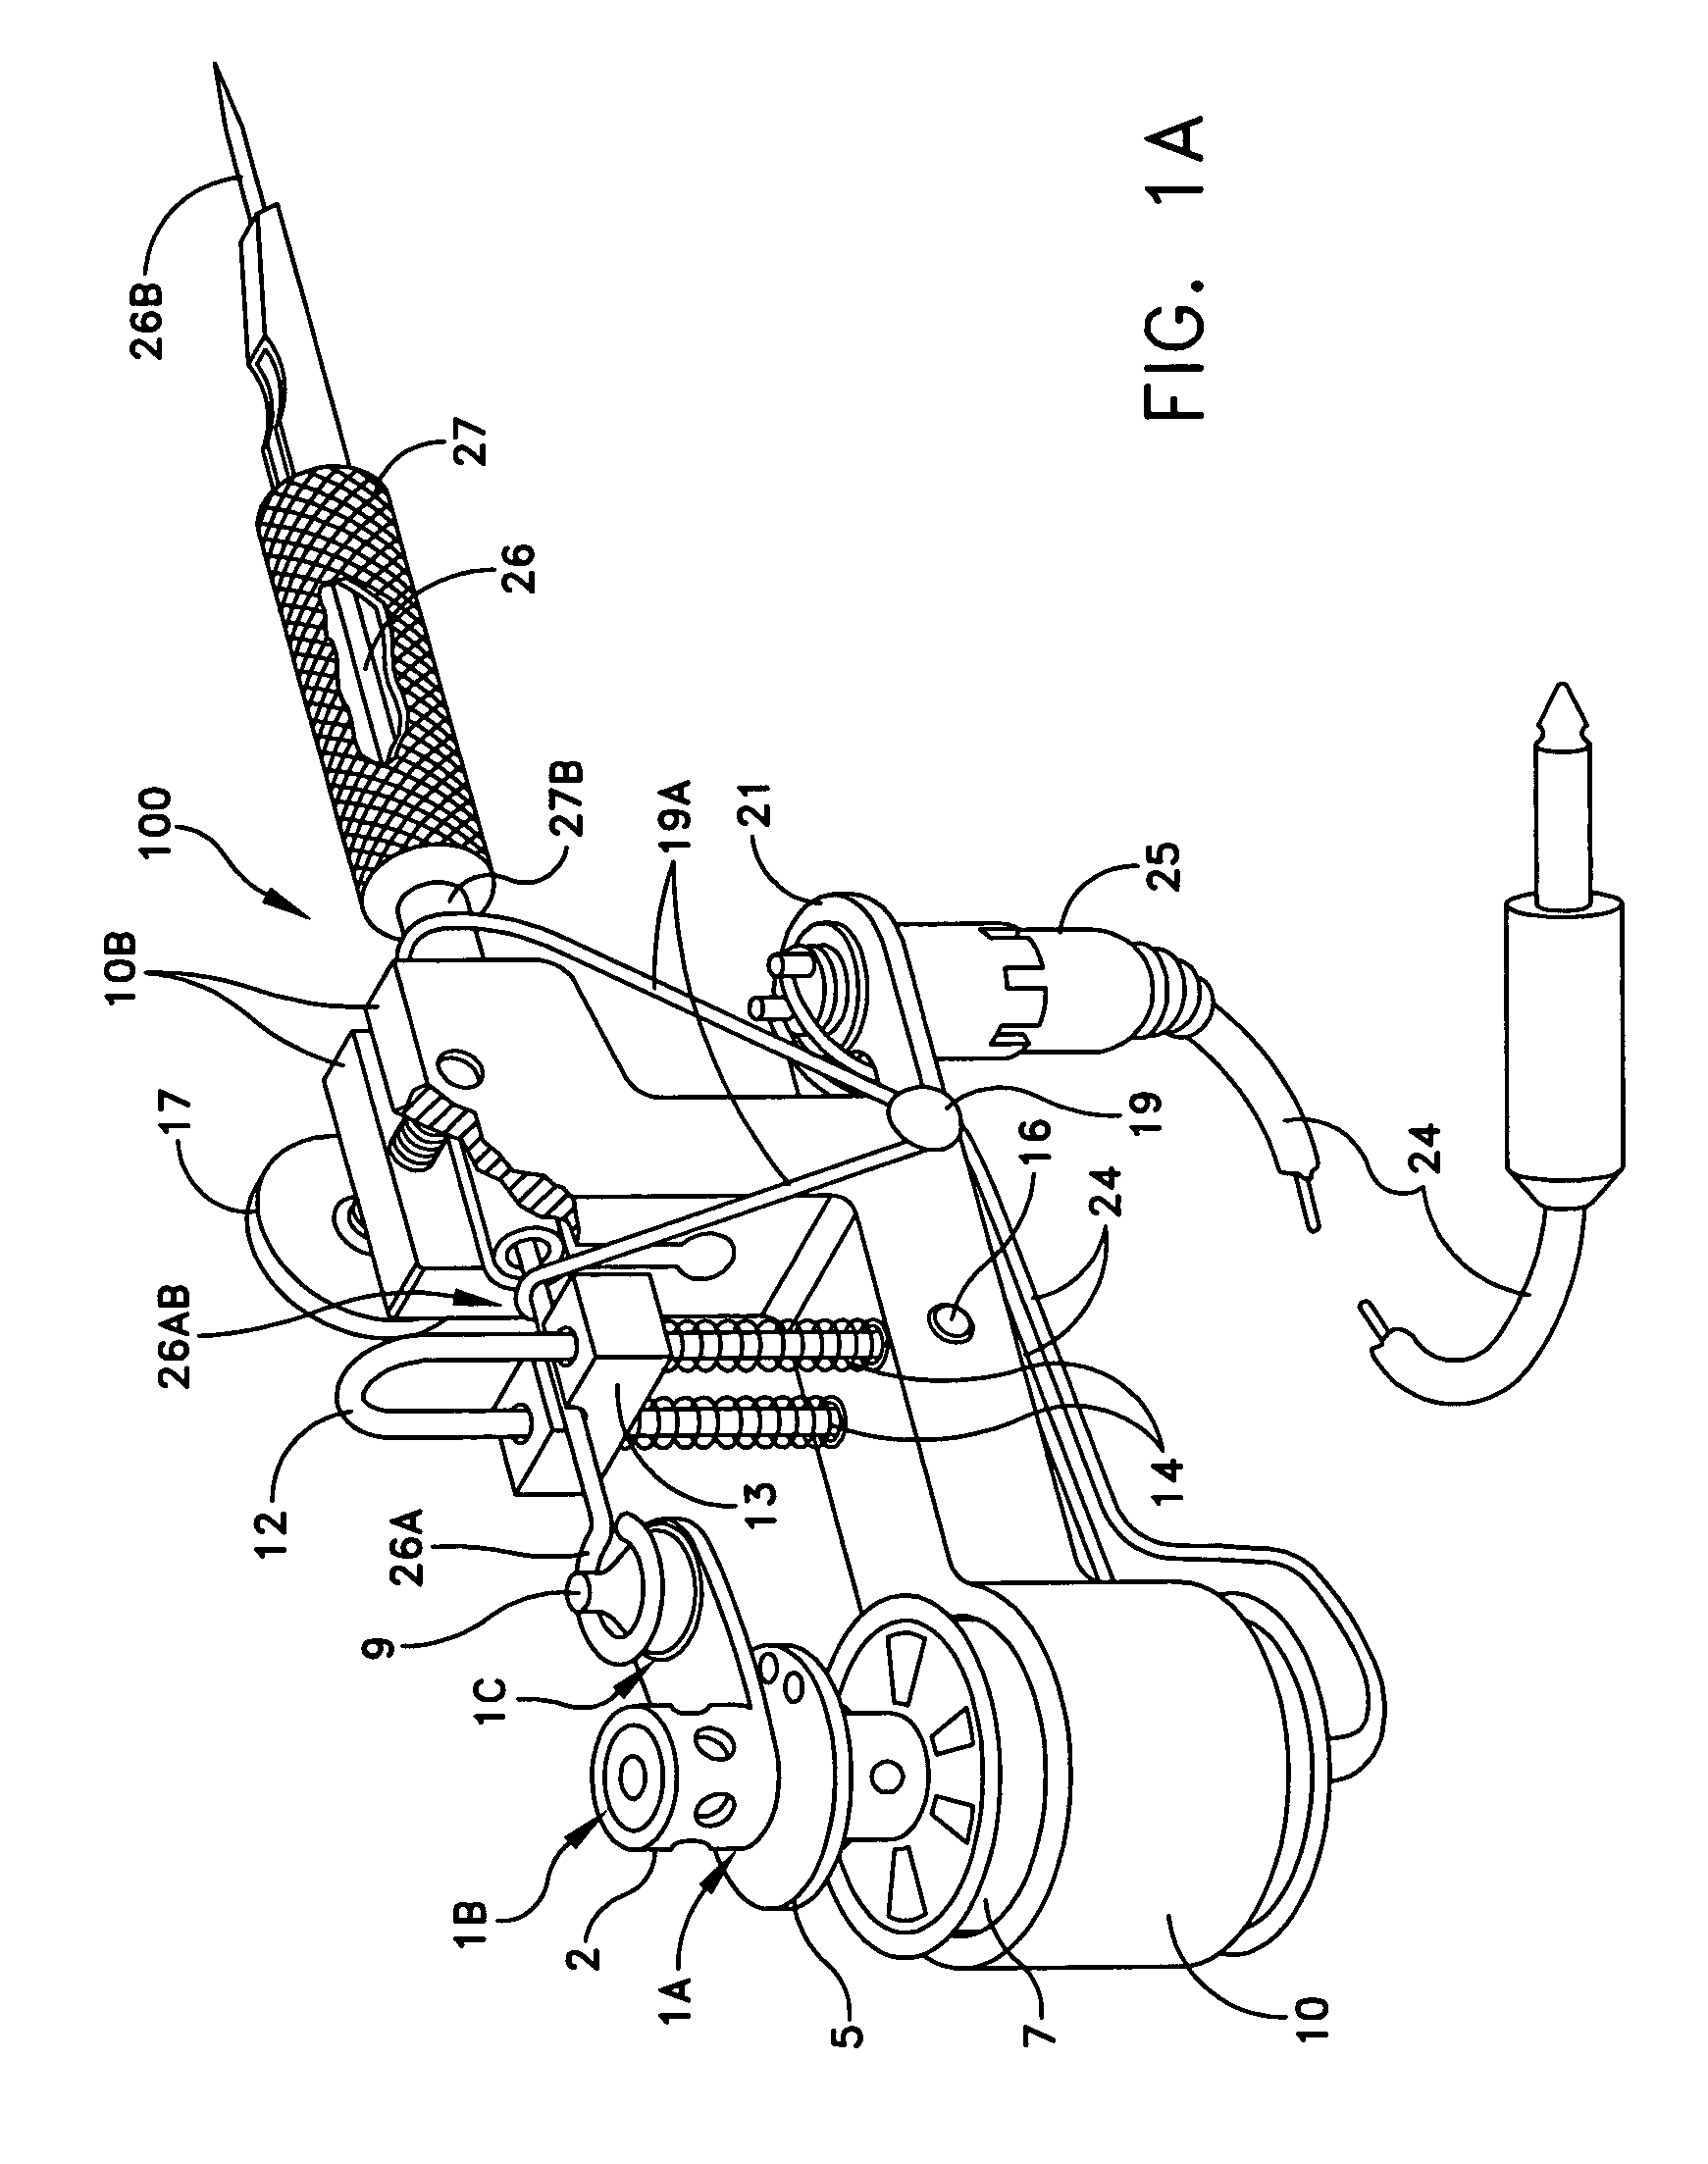 Universal rotary device for marking an article with ink